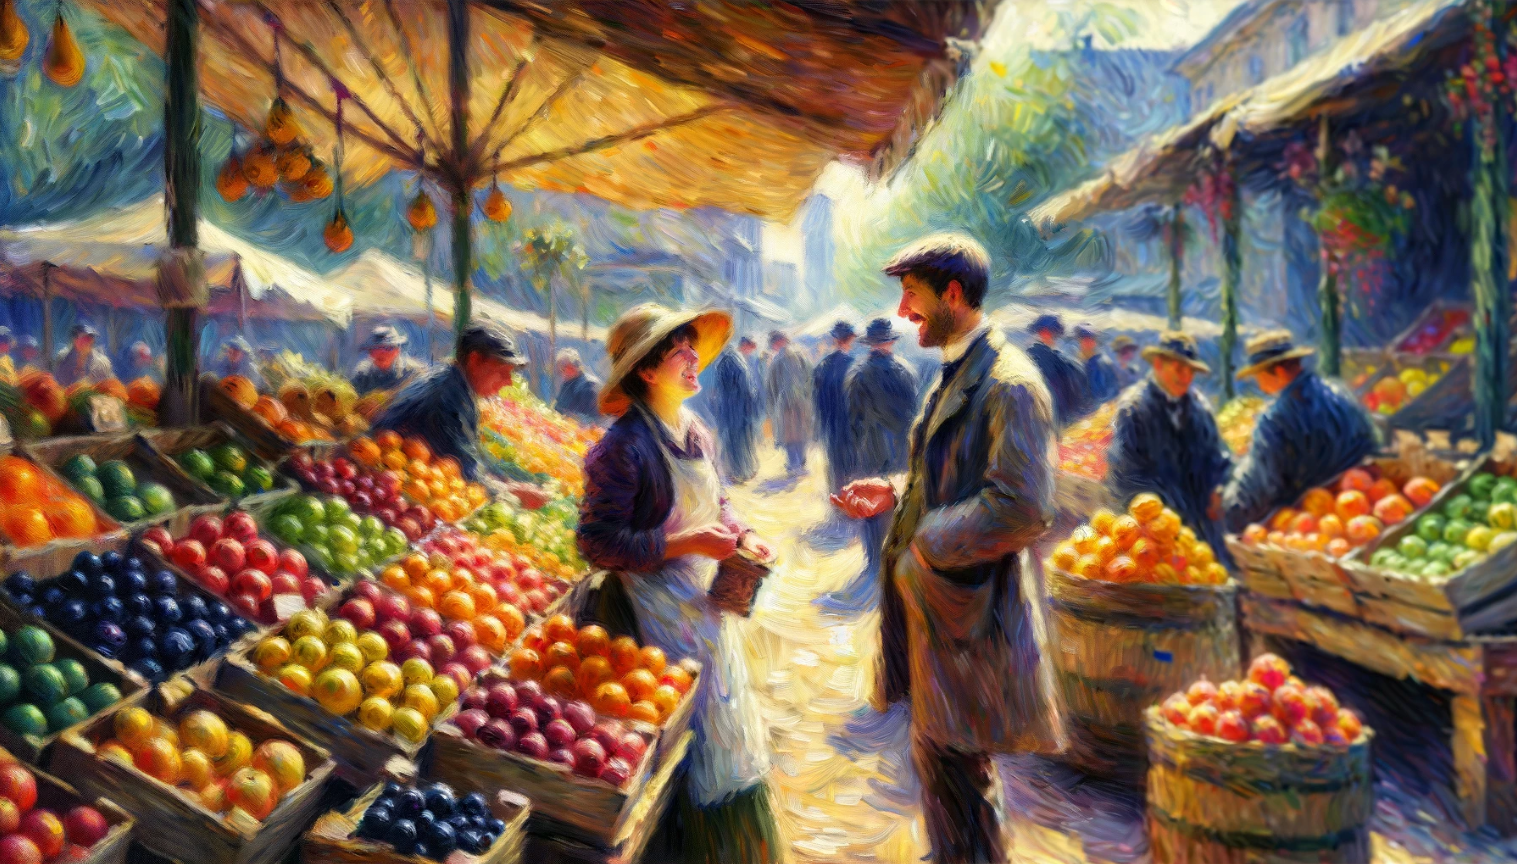 A fruit seller enjoying a happy conversation with a customer